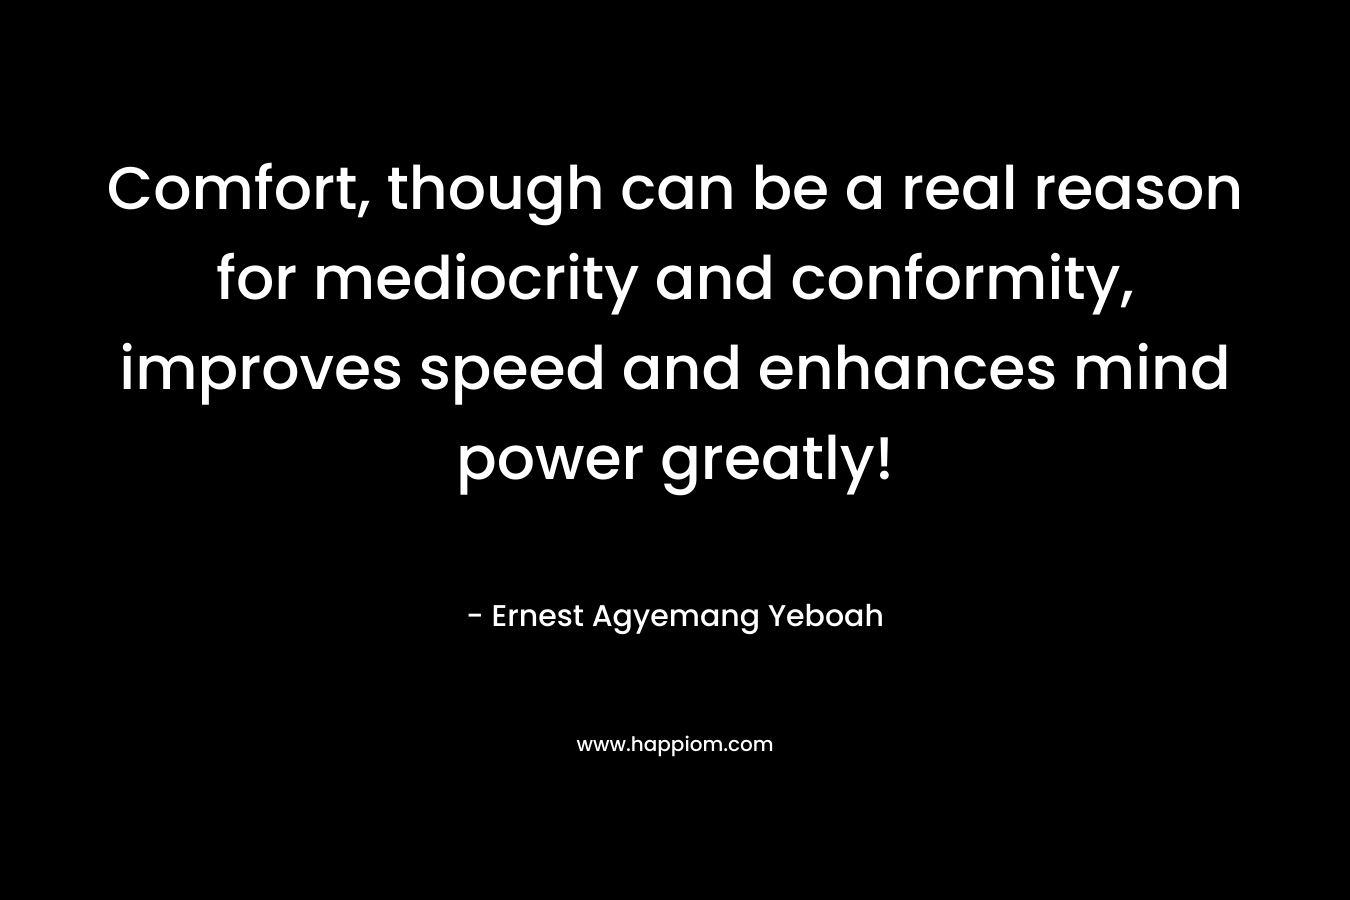 Comfort, though can be a real reason for mediocrity and conformity, improves speed and enhances mind power greatly! – Ernest Agyemang Yeboah